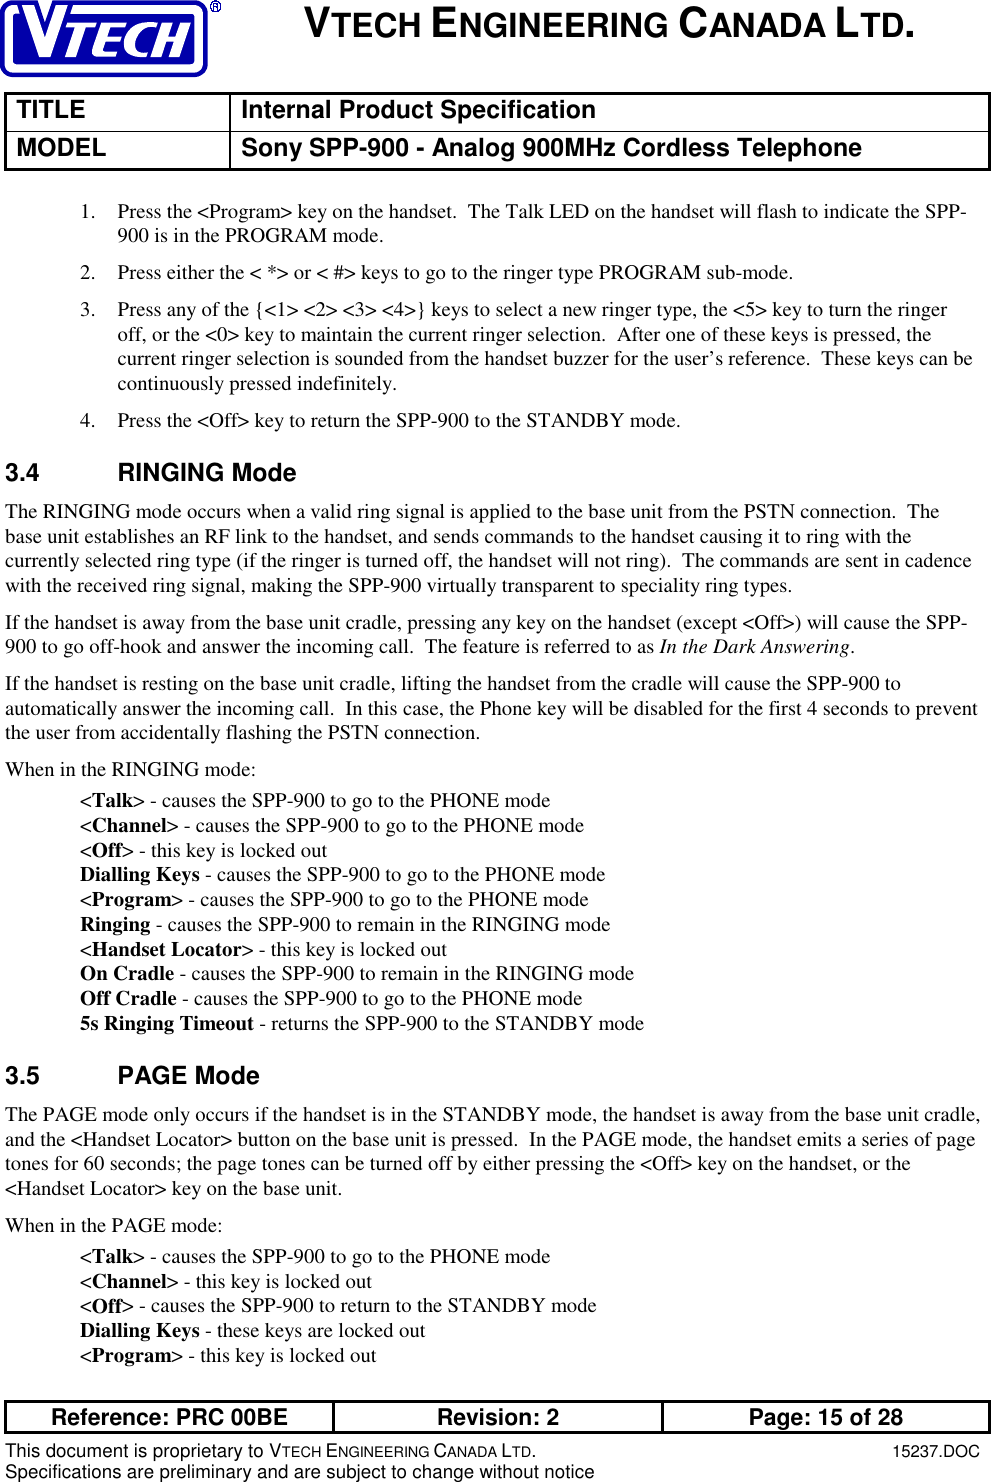 VTECH ENGINEERING CANADA LTD.TITLE Internal Product SpecificationMODEL Sony SPP-900 - Analog 900MHz Cordless TelephoneReference: PRC 00BE Revision: 2 Page: 15 of 28This document is proprietary to VTECH ENGINEERING CANADA LTD.15237.DOCSpecifications are preliminary and are subject to change without notice1. Press the &lt;Program&gt; key on the handset.  The Talk LED on the handset will flash to indicate the SPP-900 is in the PROGRAM mode.2. Press either the &lt; *&gt; or &lt; #&gt; keys to go to the ringer type PROGRAM sub-mode.3. Press any of the {&lt;1&gt; &lt;2&gt; &lt;3&gt; &lt;4&gt;} keys to select a new ringer type, the &lt;5&gt; key to turn the ringeroff, or the &lt;0&gt; key to maintain the current ringer selection.  After one of these keys is pressed, thecurrent ringer selection is sounded from the handset buzzer for the user’s reference.  These keys can becontinuously pressed indefinitely.4. Press the &lt;Off&gt; key to return the SPP-900 to the STANDBY mode.3.4 RINGING ModeThe RINGING mode occurs when a valid ring signal is applied to the base unit from the PSTN connection.  Thebase unit establishes an RF link to the handset, and sends commands to the handset causing it to ring with thecurrently selected ring type (if the ringer is turned off, the handset will not ring).  The commands are sent in cadencewith the received ring signal, making the SPP-900 virtually transparent to speciality ring types.If the handset is away from the base unit cradle, pressing any key on the handset (except &lt;Off&gt;) will cause the SPP-900 to go off-hook and answer the incoming call.  The feature is referred to as In the Dark Answering.If the handset is resting on the base unit cradle, lifting the handset from the cradle will cause the SPP-900 toautomatically answer the incoming call.  In this case, the Phone key will be disabled for the first 4 seconds to preventthe user from accidentally flashing the PSTN connection.When in the RINGING mode:&lt;Talk&gt; - causes the SPP-900 to go to the PHONE mode&lt;Channel&gt; - causes the SPP-900 to go to the PHONE mode&lt;Off&gt; - this key is locked outDialling Keys - causes the SPP-900 to go to the PHONE mode&lt;Program&gt; - causes the SPP-900 to go to the PHONE modeRinging - causes the SPP-900 to remain in the RINGING mode&lt;Handset Locator&gt; - this key is locked outOn Cradle - causes the SPP-900 to remain in the RINGING modeOff Cradle - causes the SPP-900 to go to the PHONE mode5s Ringing Timeout - returns the SPP-900 to the STANDBY mode3.5 PAGE ModeThe PAGE mode only occurs if the handset is in the STANDBY mode, the handset is away from the base unit cradle,and the &lt;Handset Locator&gt; button on the base unit is pressed.  In the PAGE mode, the handset emits a series of pagetones for 60 seconds; the page tones can be turned off by either pressing the &lt;Off&gt; key on the handset, or the&lt;Handset Locator&gt; key on the base unit.When in the PAGE mode:&lt;Talk&gt; - causes the SPP-900 to go to the PHONE mode&lt;Channel&gt; - this key is locked out&lt;Off&gt; - causes the SPP-900 to return to the STANDBY modeDialling Keys - these keys are locked out&lt;Program&gt; - this key is locked out